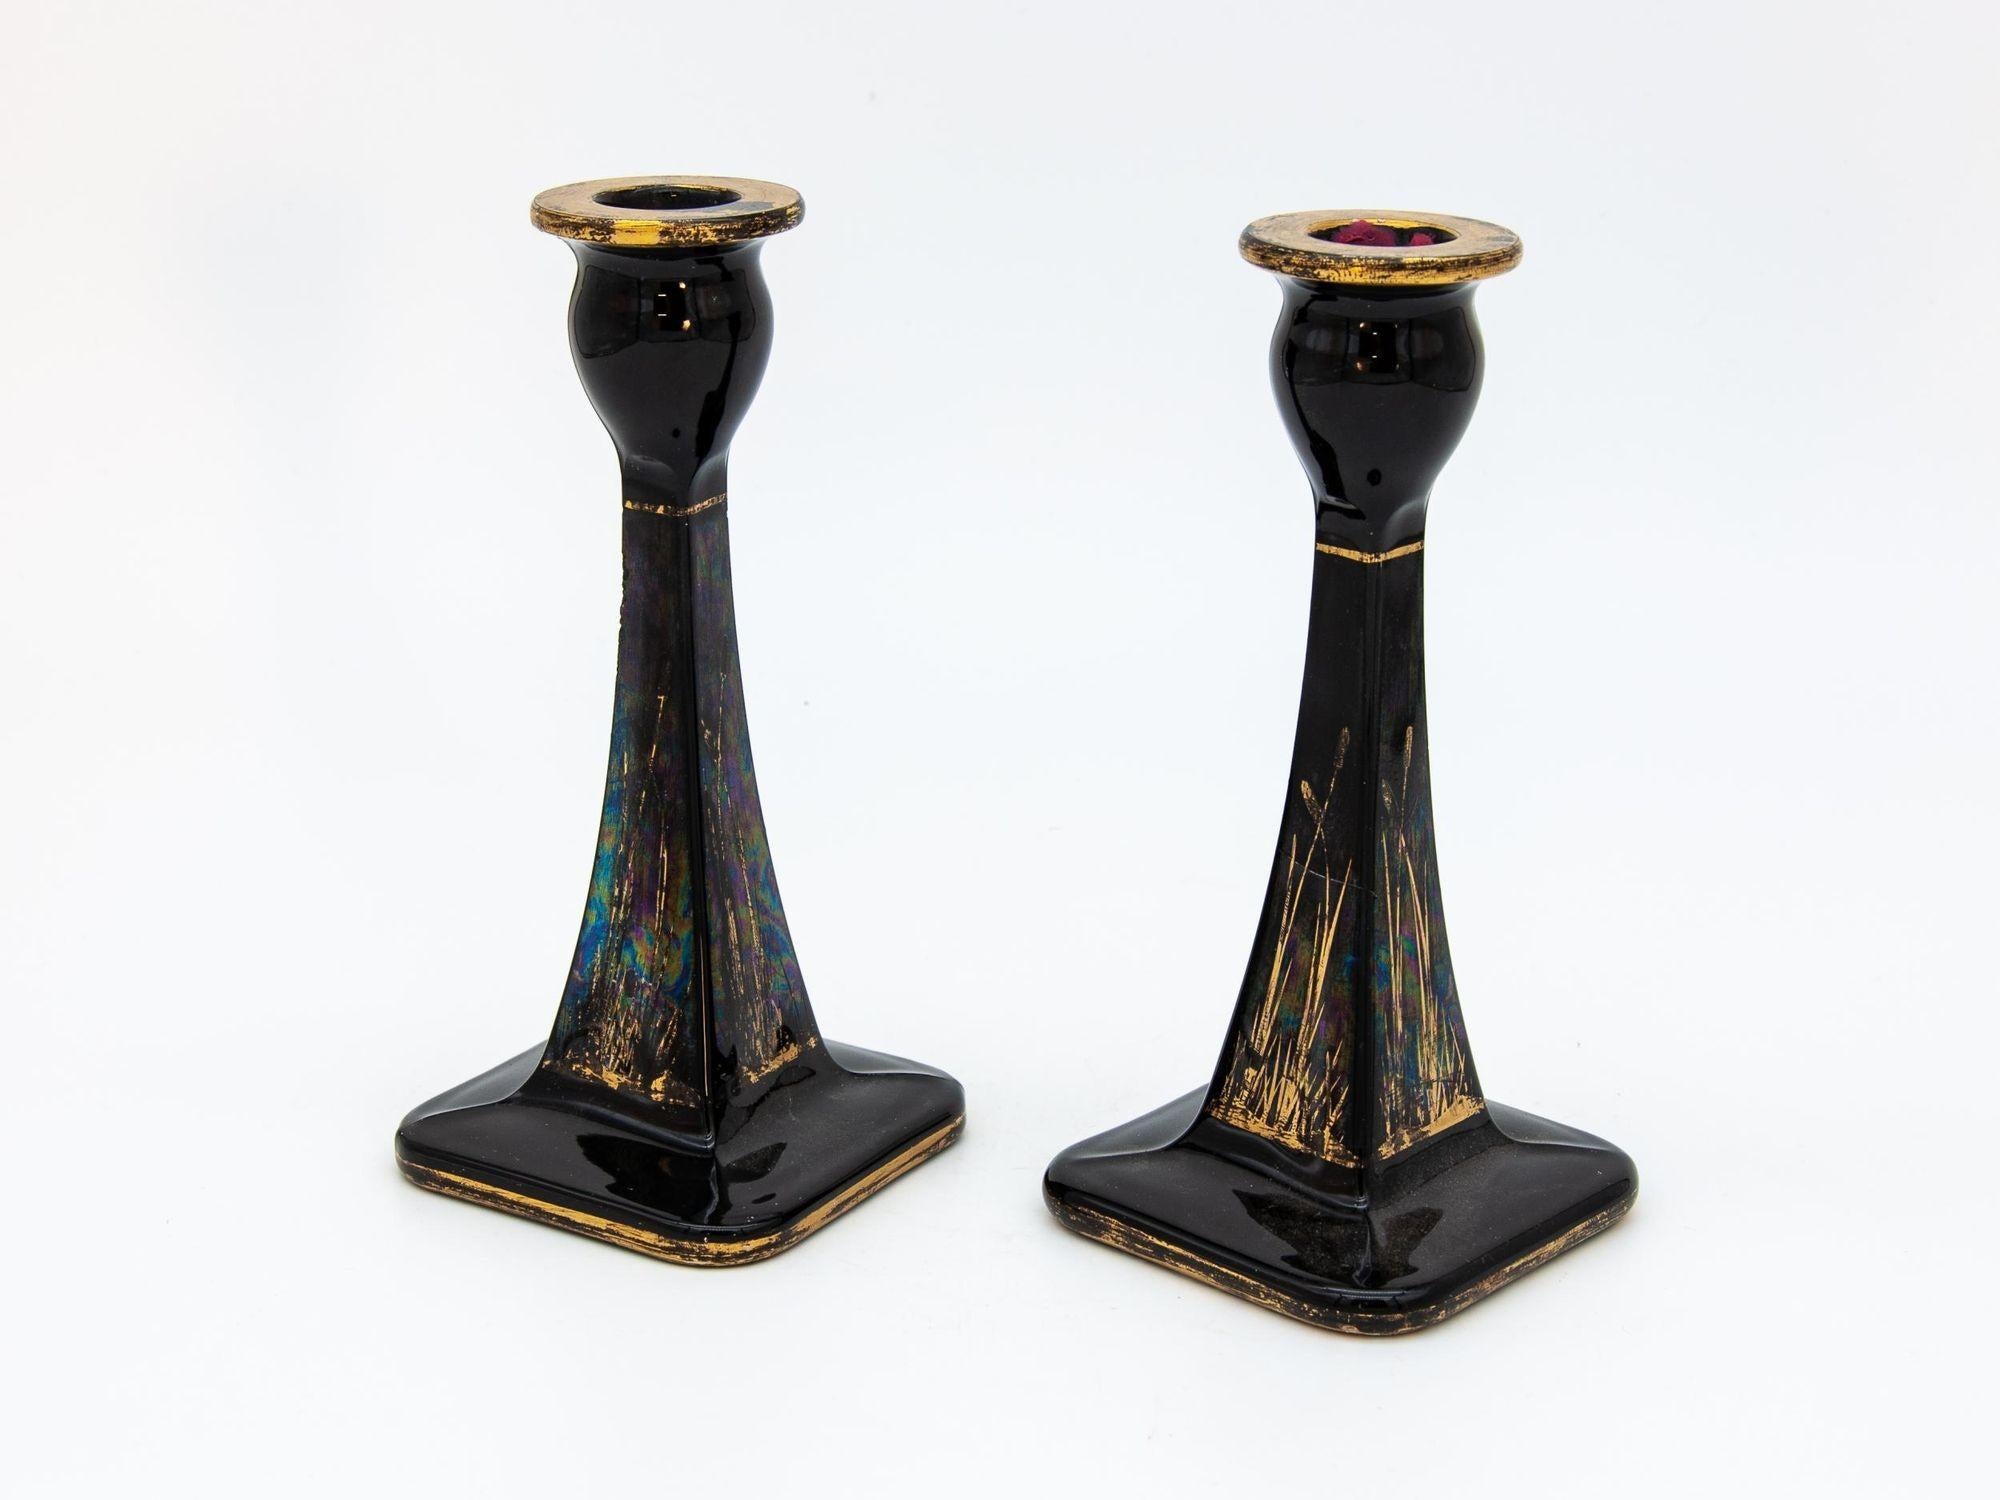 A pair of 1970s era black & gold candle holders with a carnival glass finish. Each candlestick has a tapered square column terminating on a square base. The cup is rounded with a gilt finish. The black finish column has a painted gold design on all